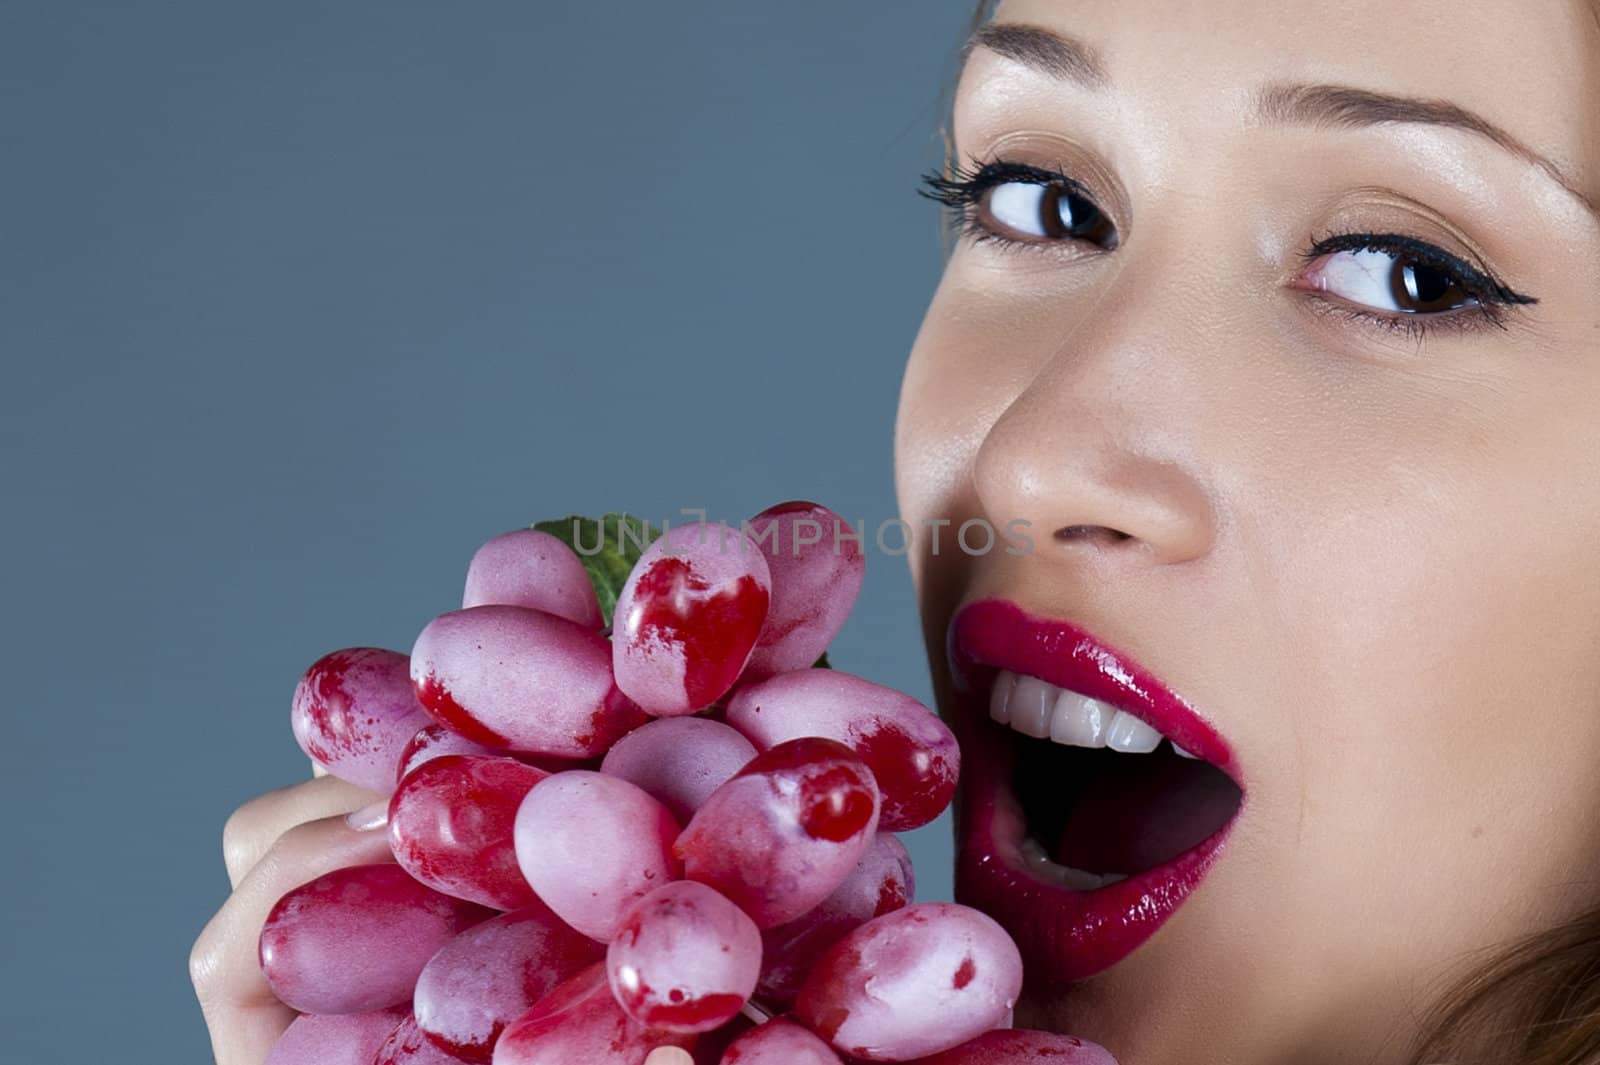 Portrait of model with grapes in a hand